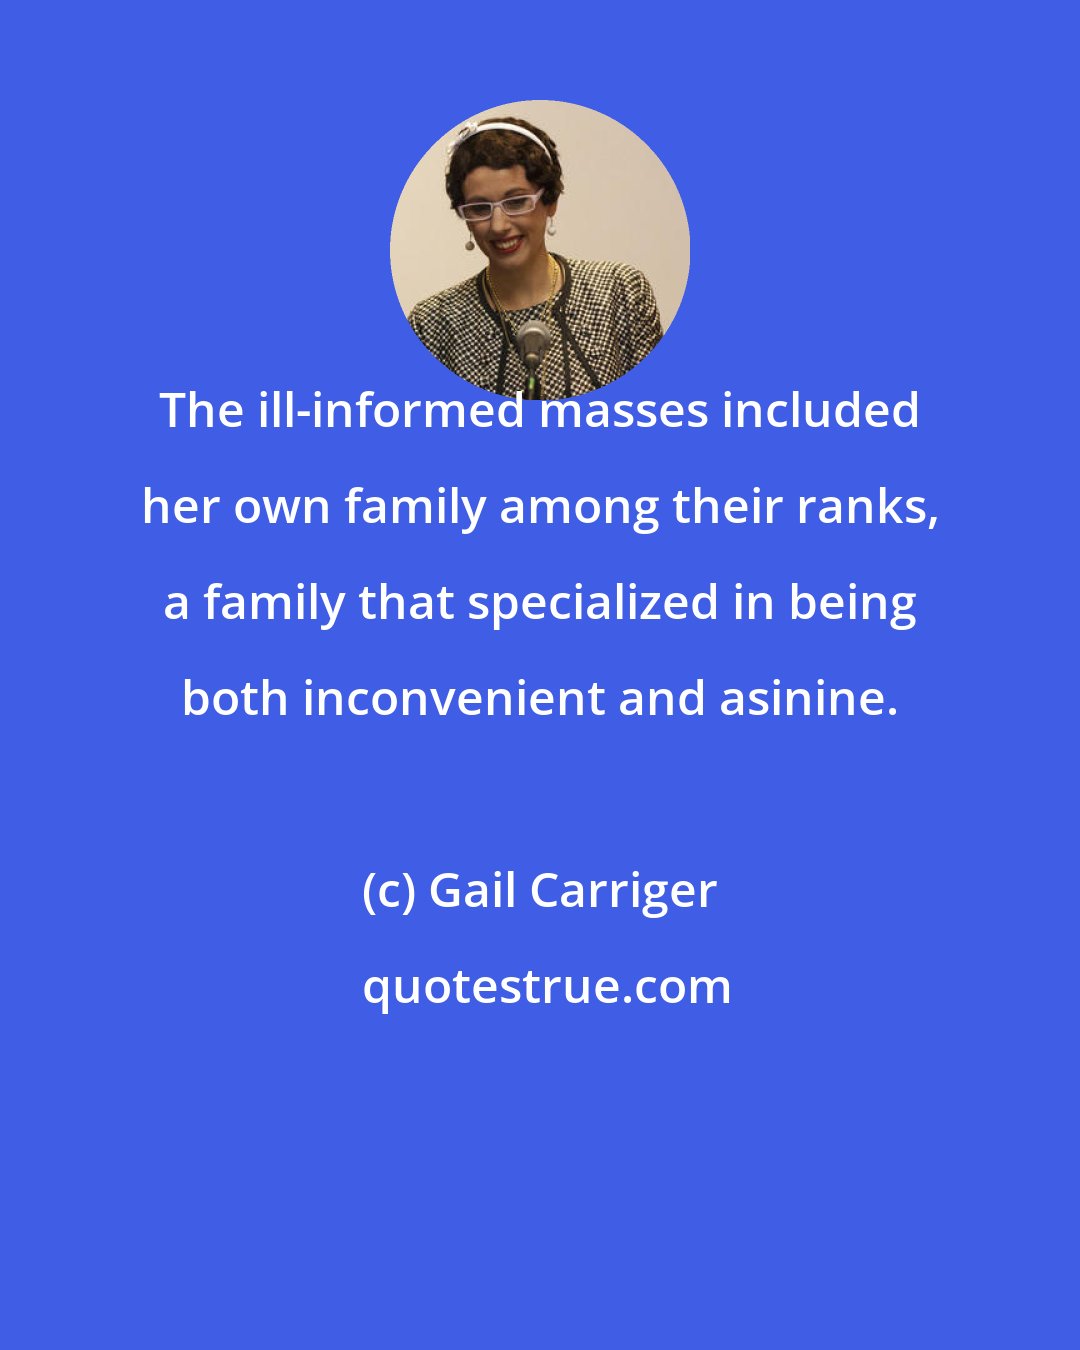 Gail Carriger: The ill-informed masses included her own family among their ranks, a family that specialized in being both inconvenient and asinine.